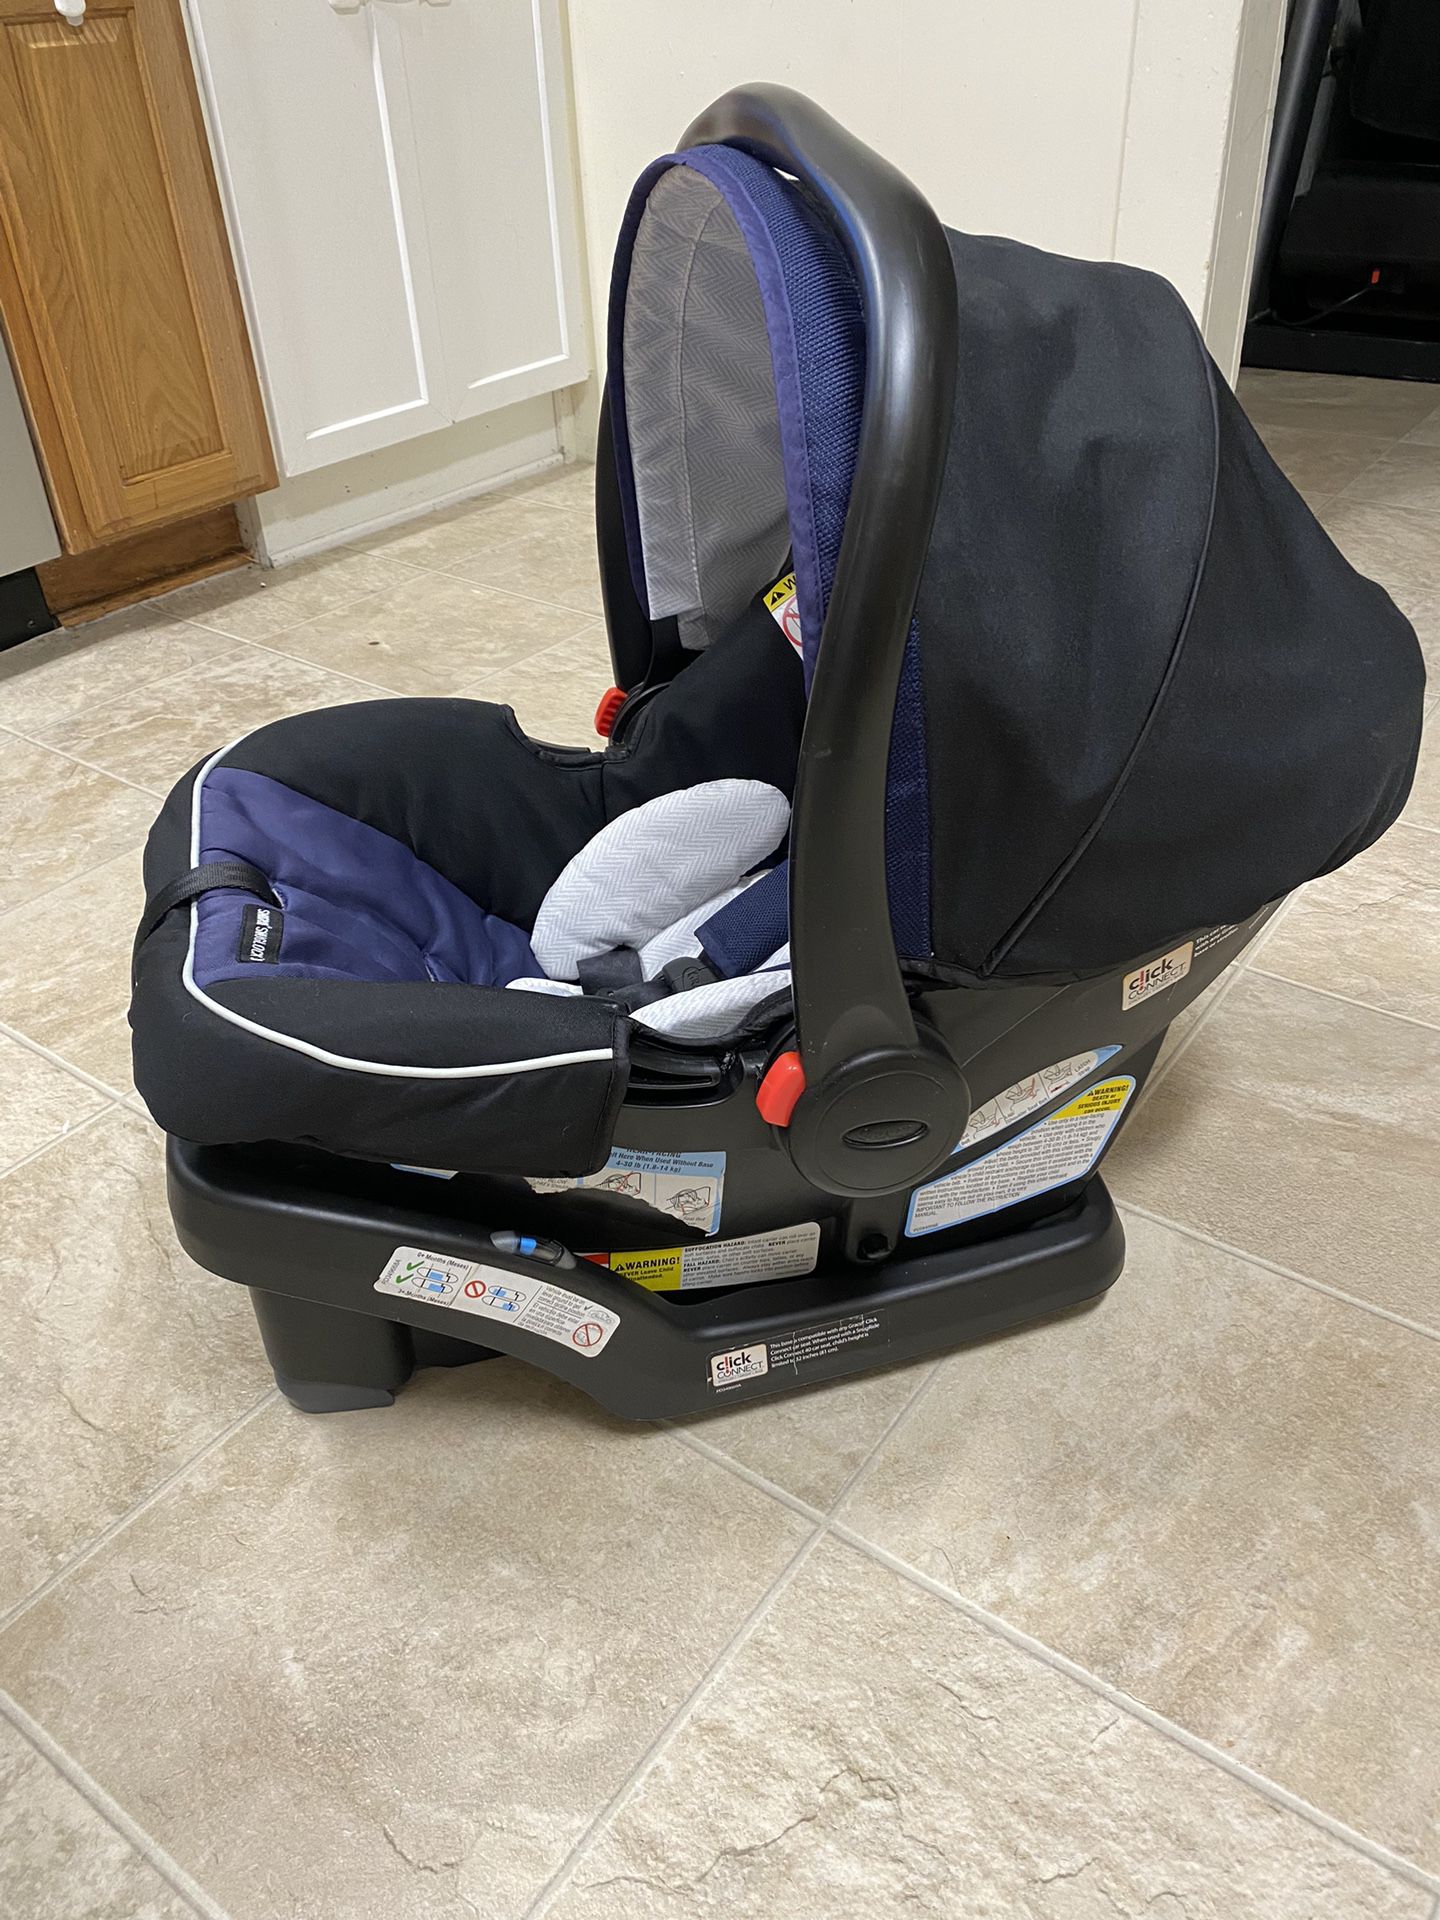 Graco Baby- Infant Car Seat